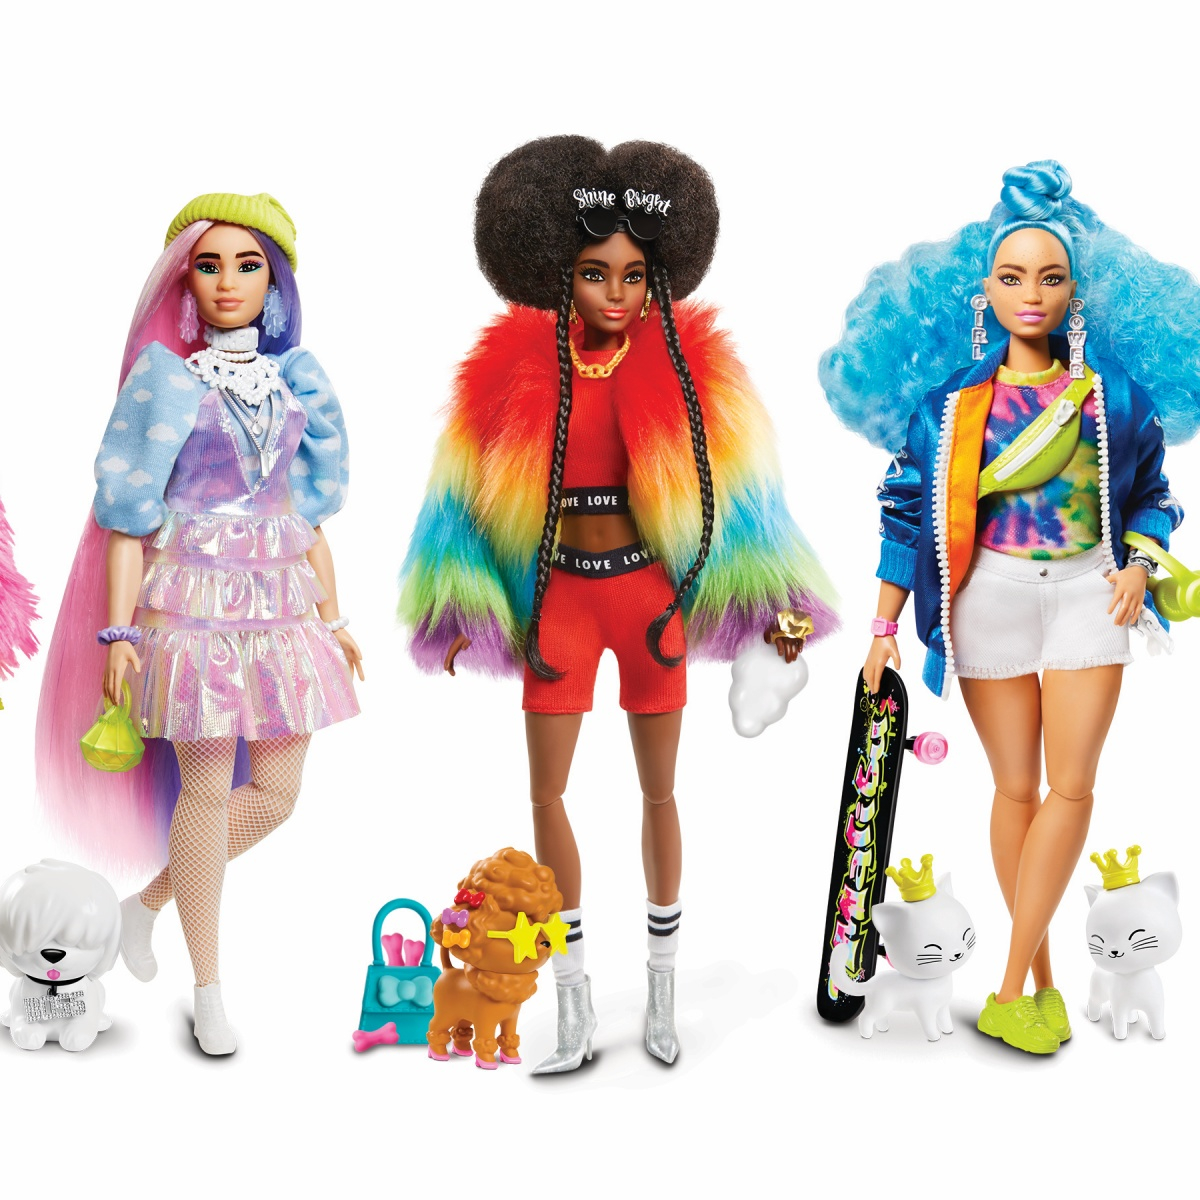 Lada Pidgin passagier Barbie's New Dolls Are So "Extra"—and Perfect for Holiday Gifts - E! Online